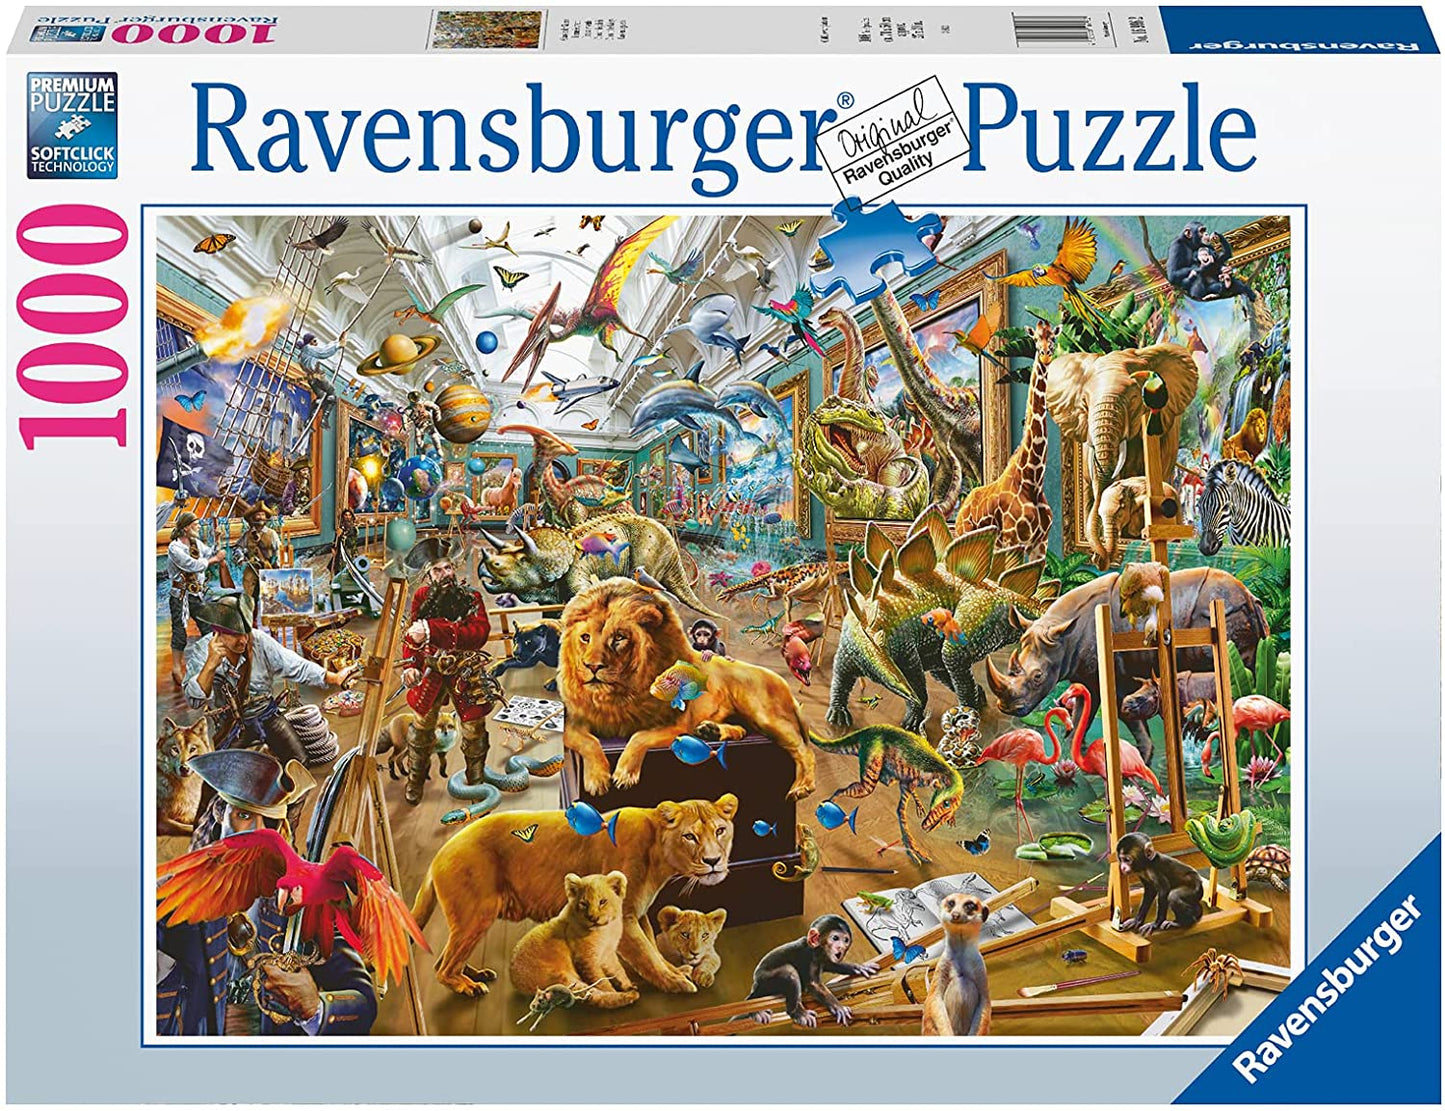 Ravensburger - Chaos in the Gallery - 1000 Piece Jigsaw Puzzle